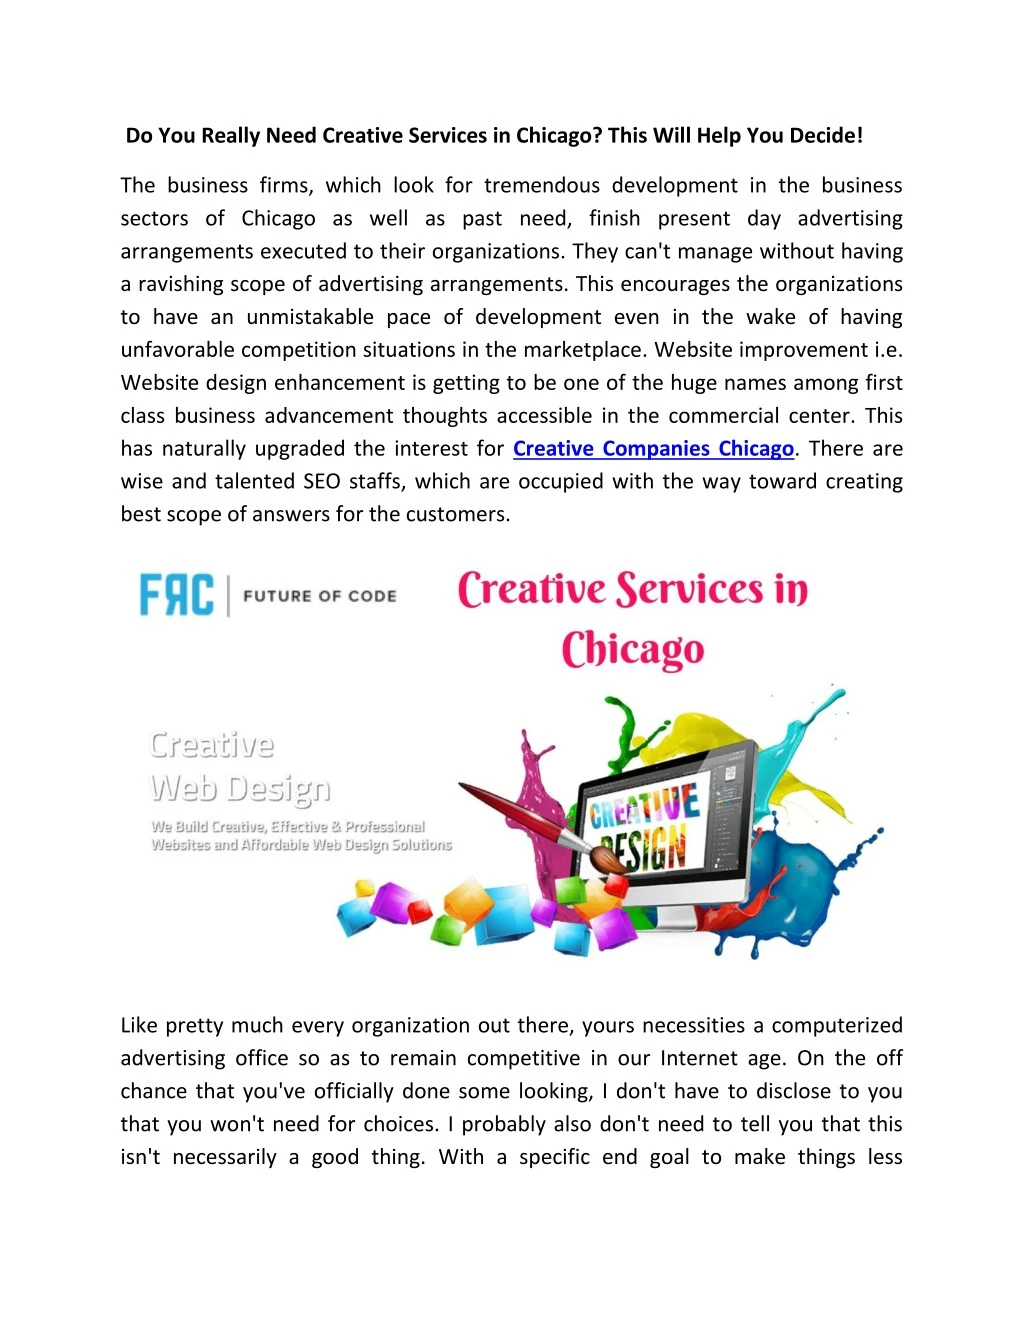 do you really need creative services in chicago